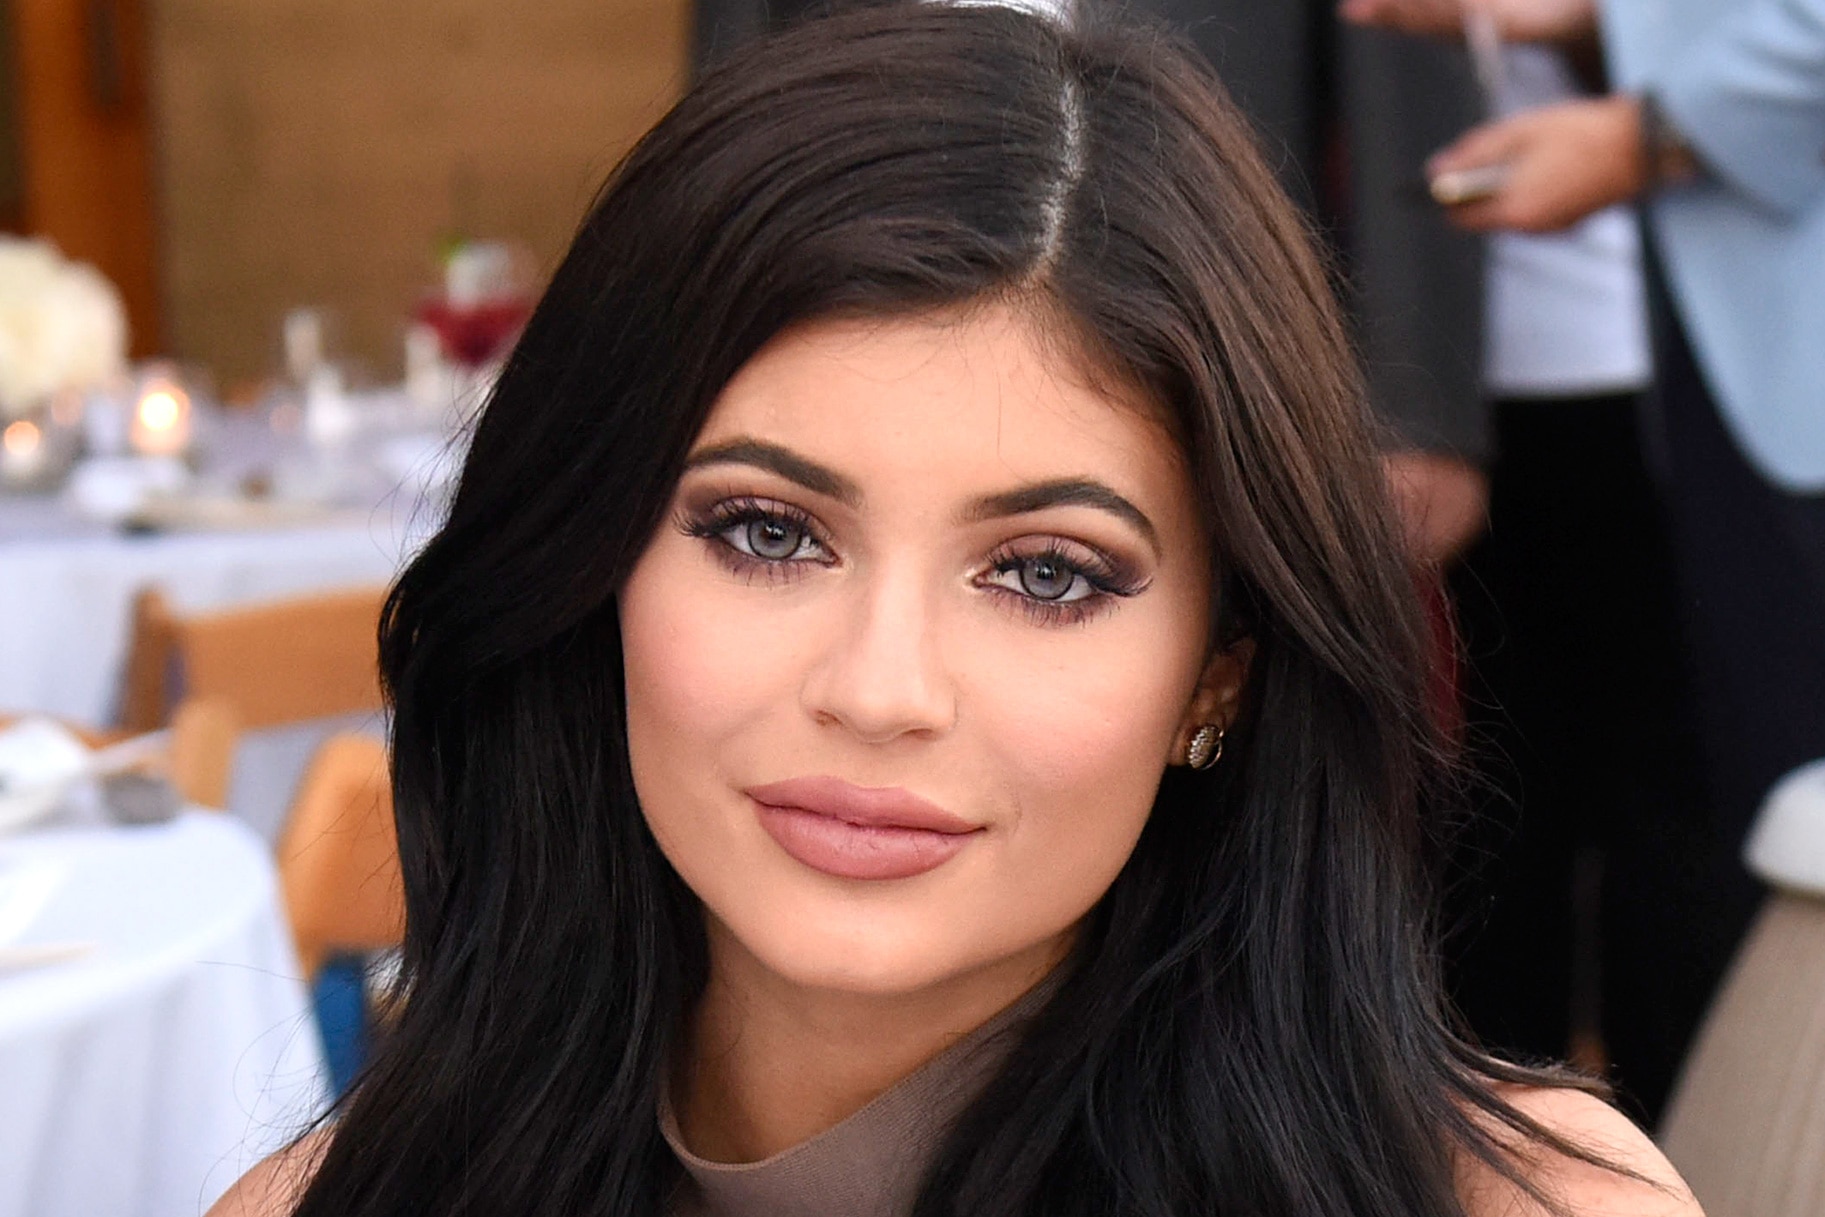 Kylie Jenner goes shopping at the Topanga Canyon Mall in Canoga